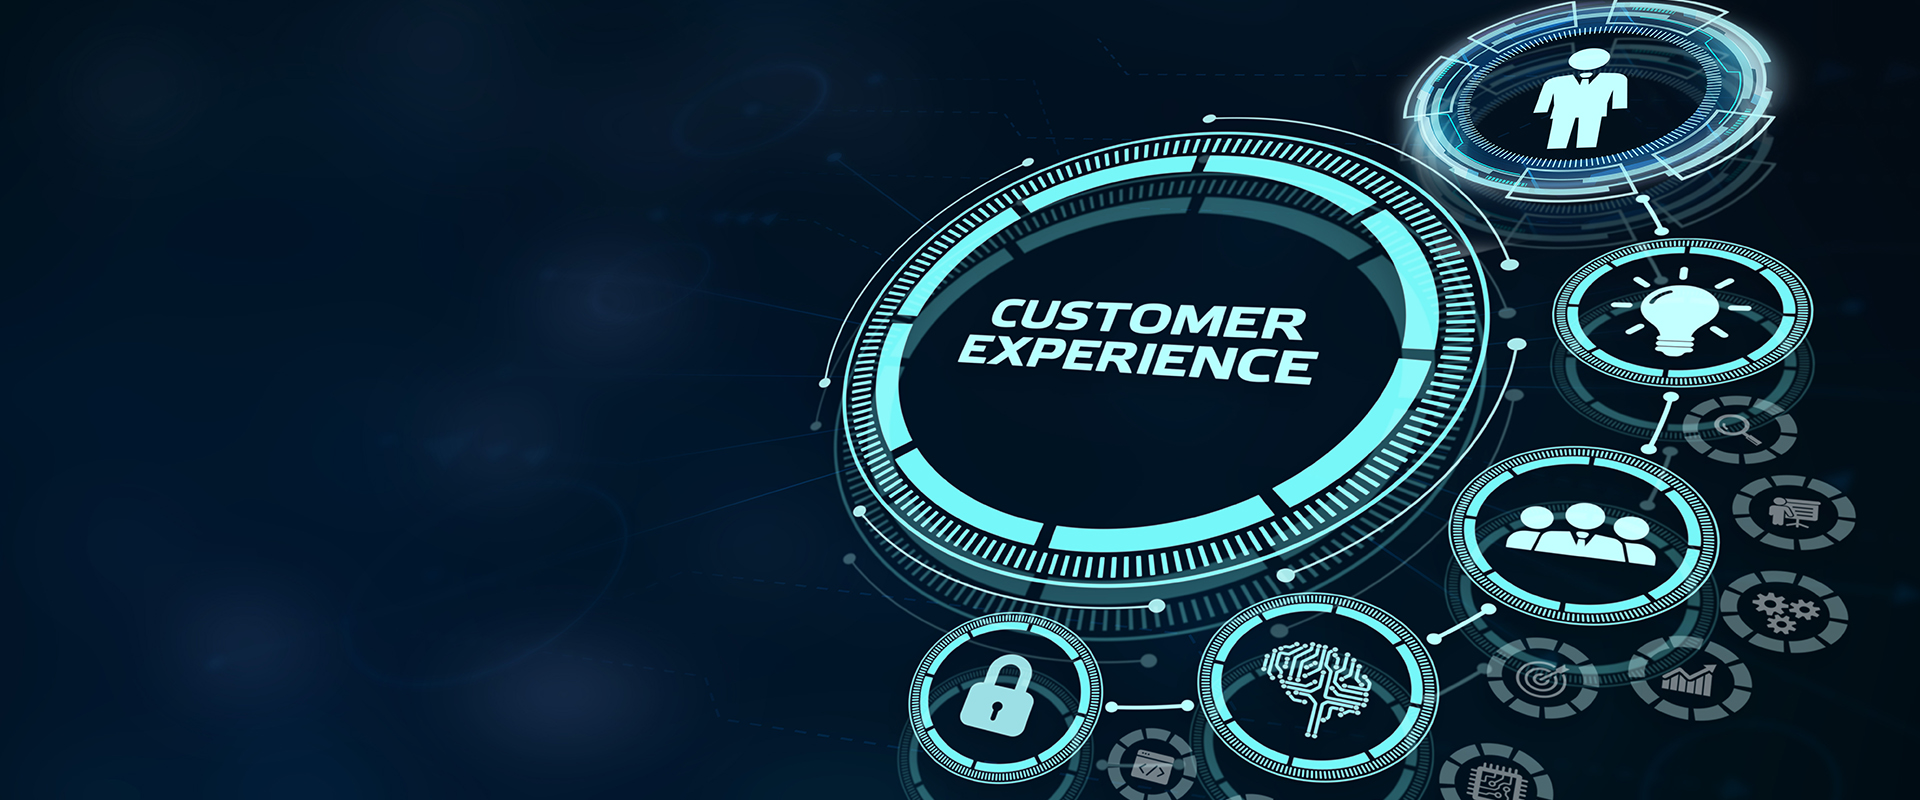 Customer experience analytics: the importance of CX governance